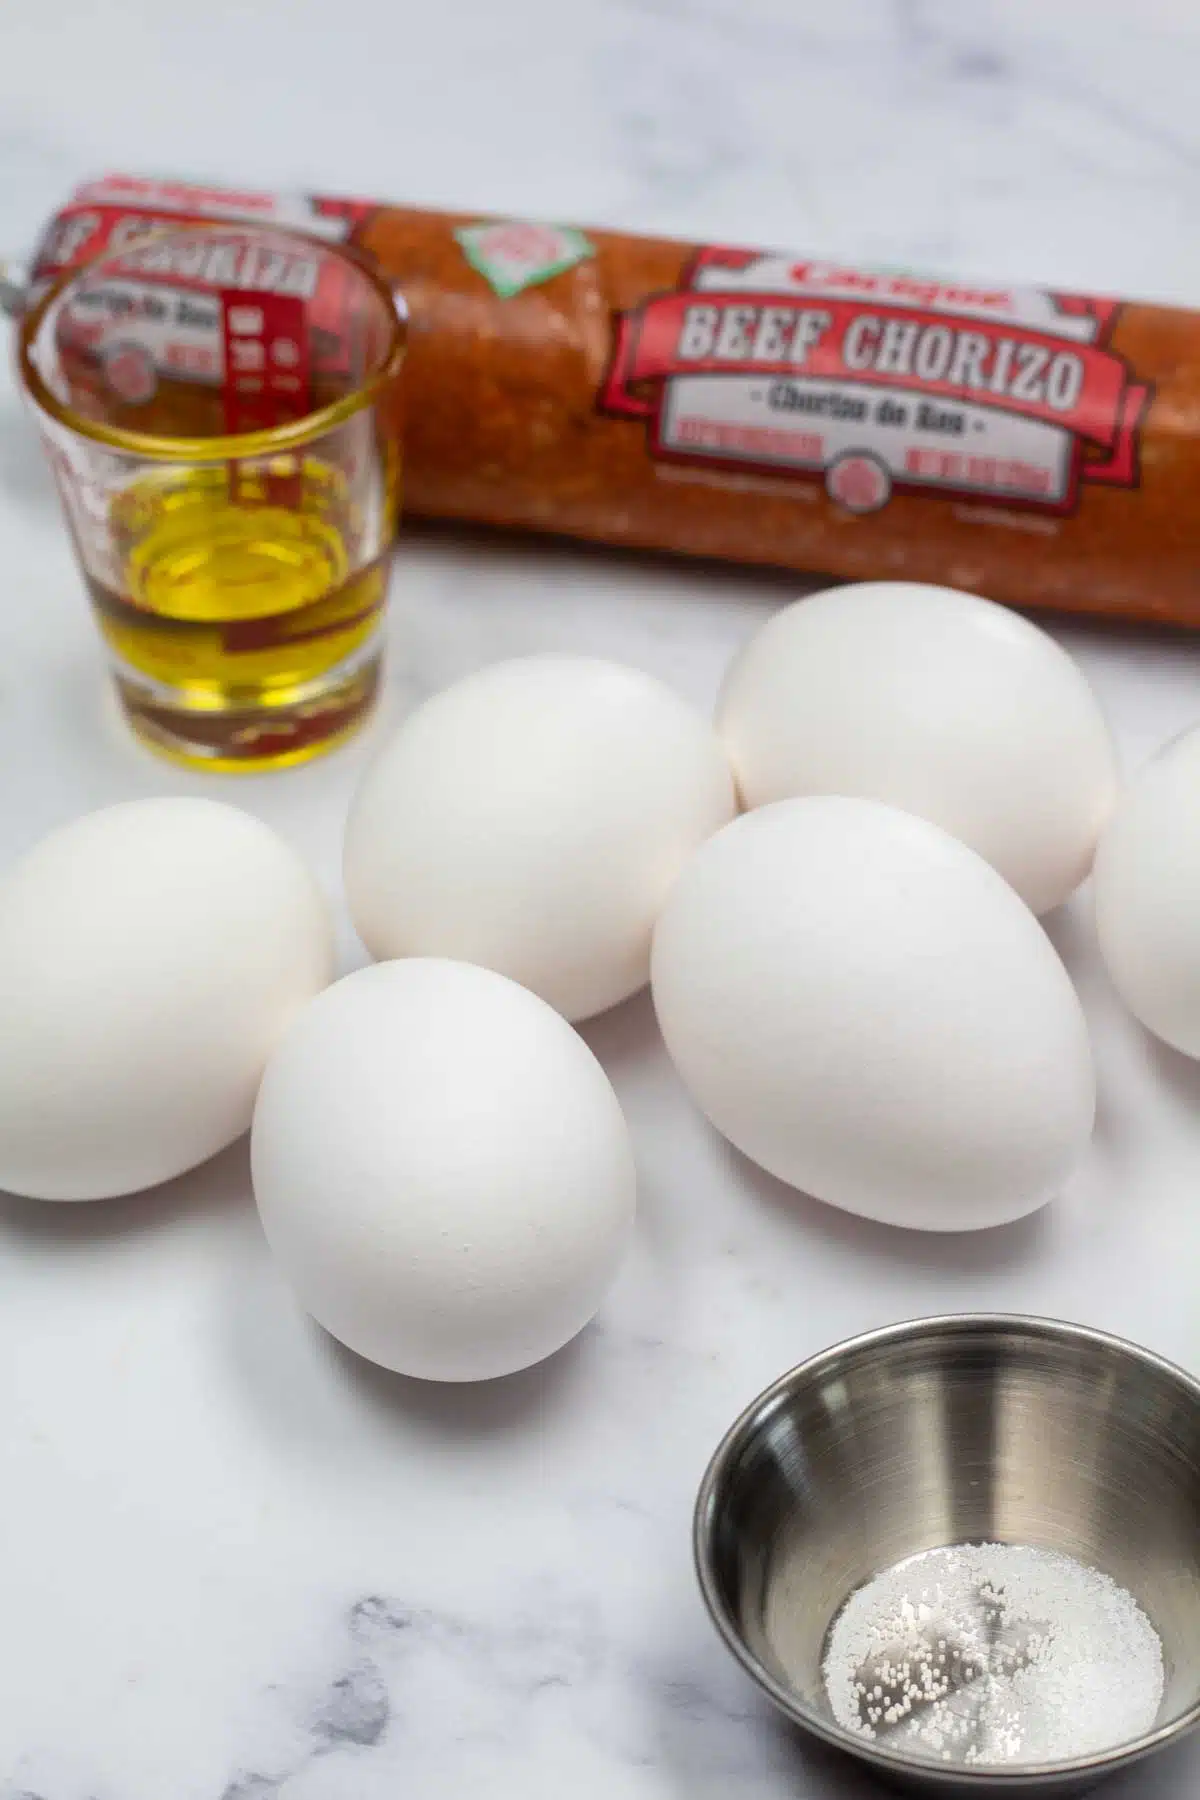 Photo showing ingredients needed for chorizo and eggs.